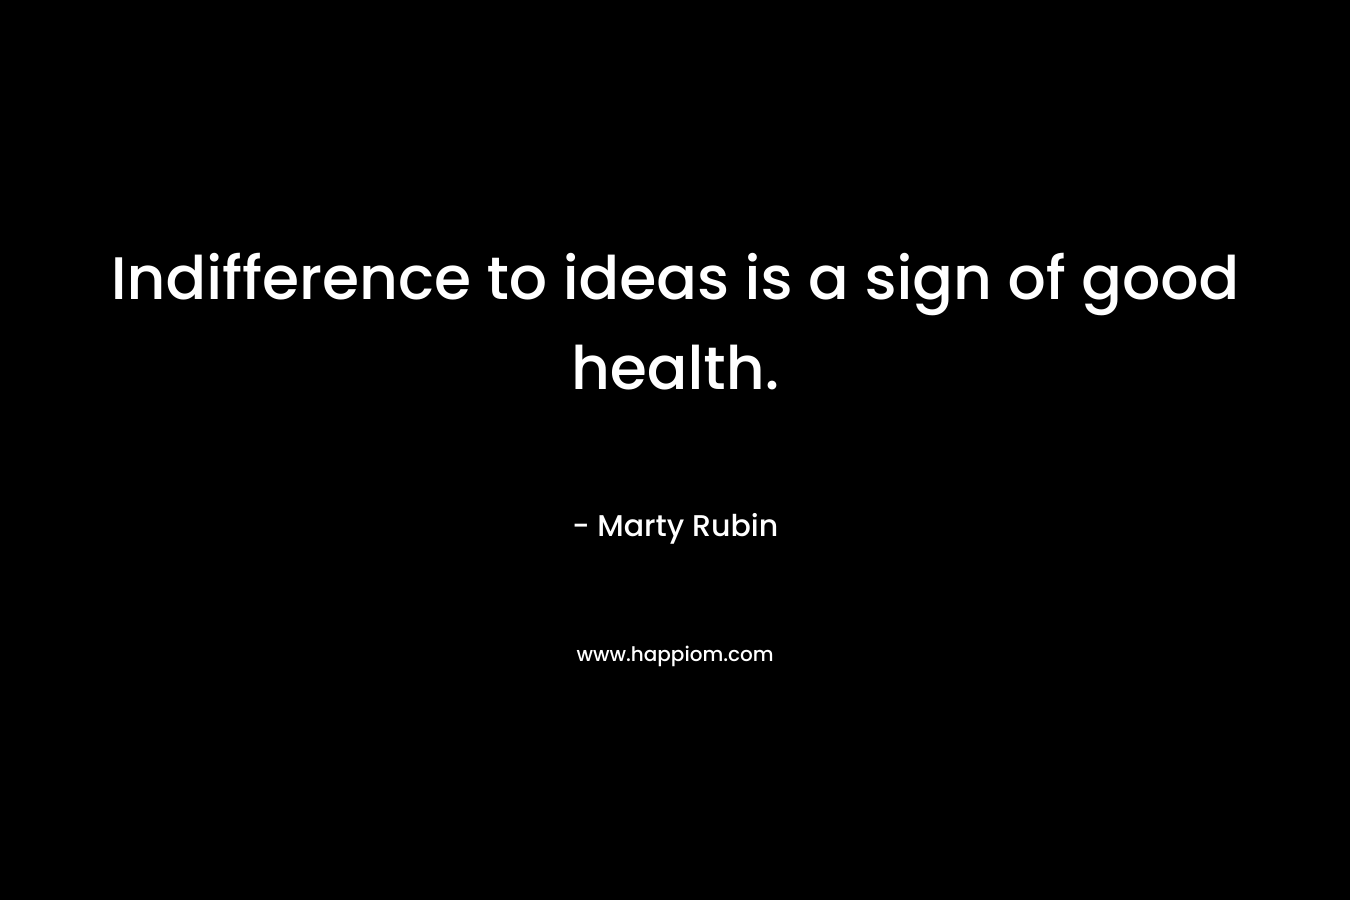 Indifference to ideas is a sign of good health. – Marty Rubin